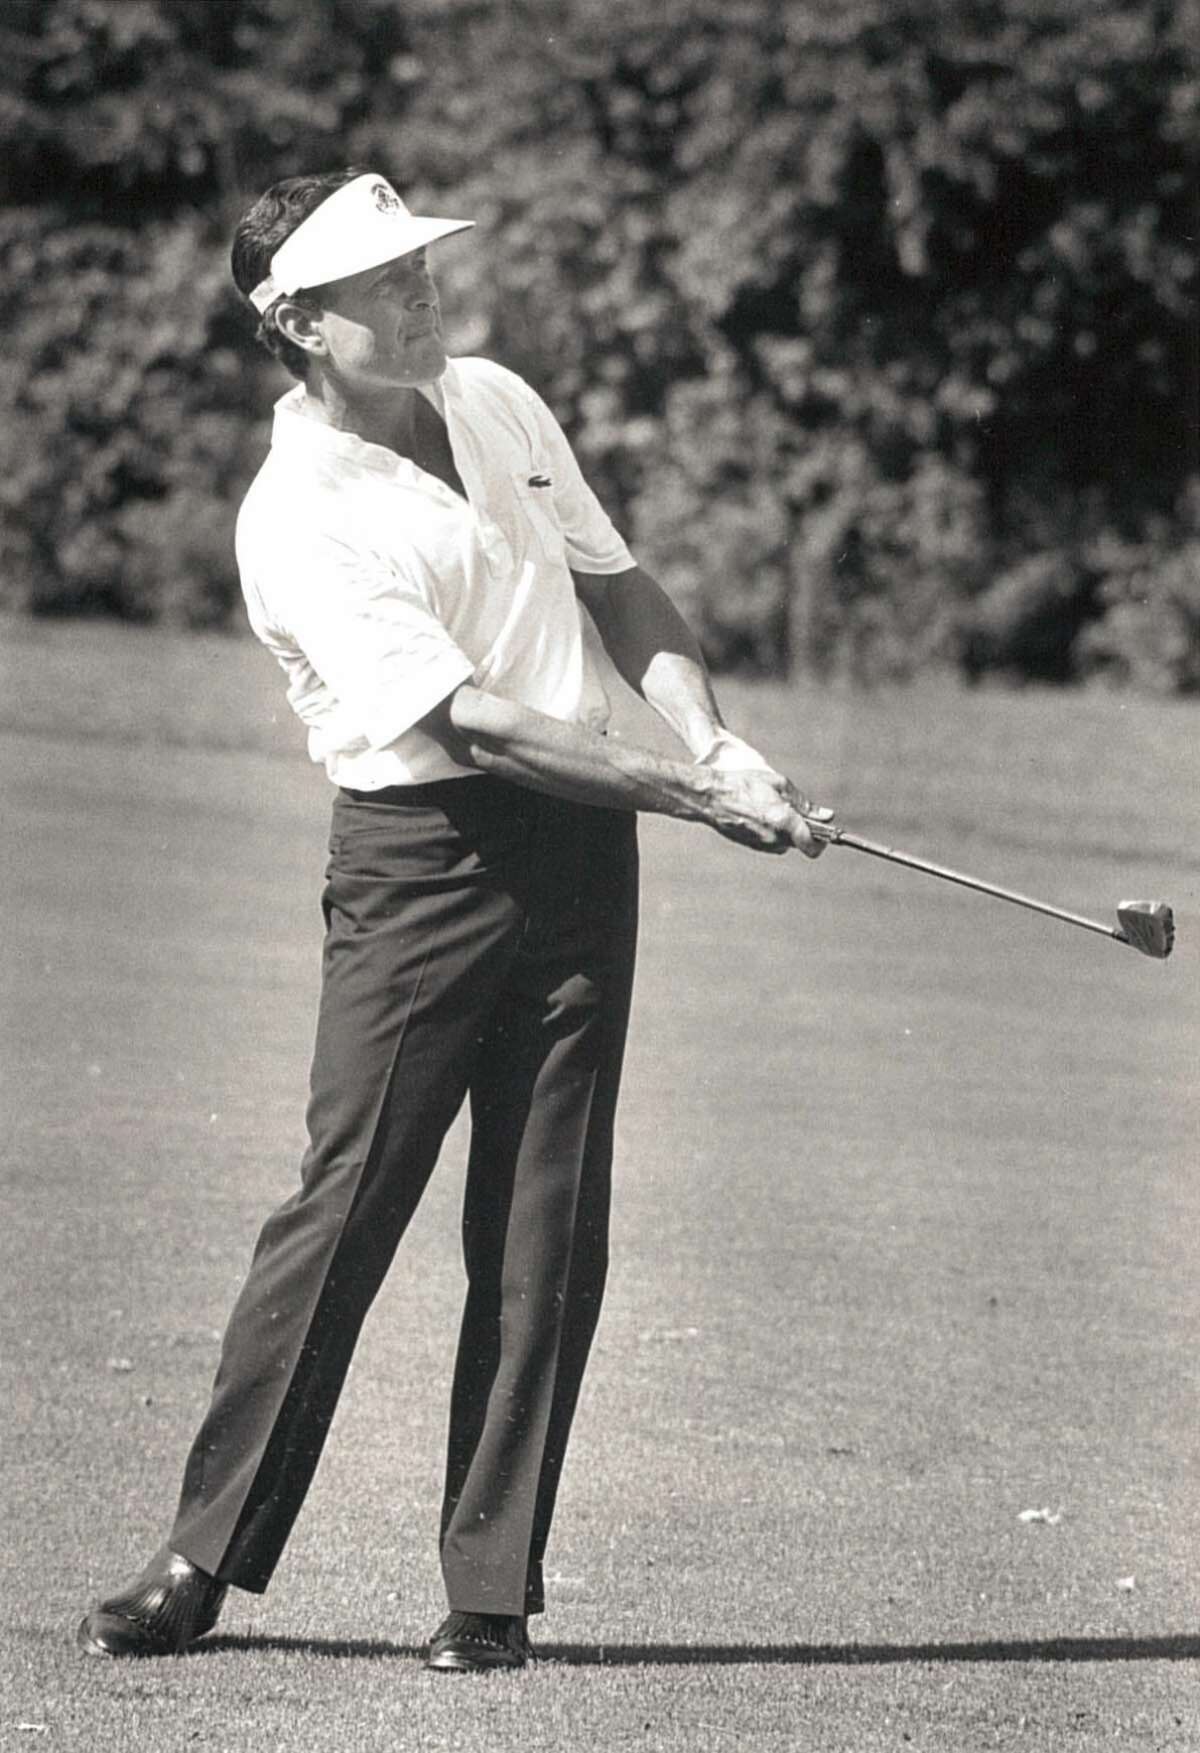 Dick Siderowf, back when he was one of the top amateur golfers in the world.